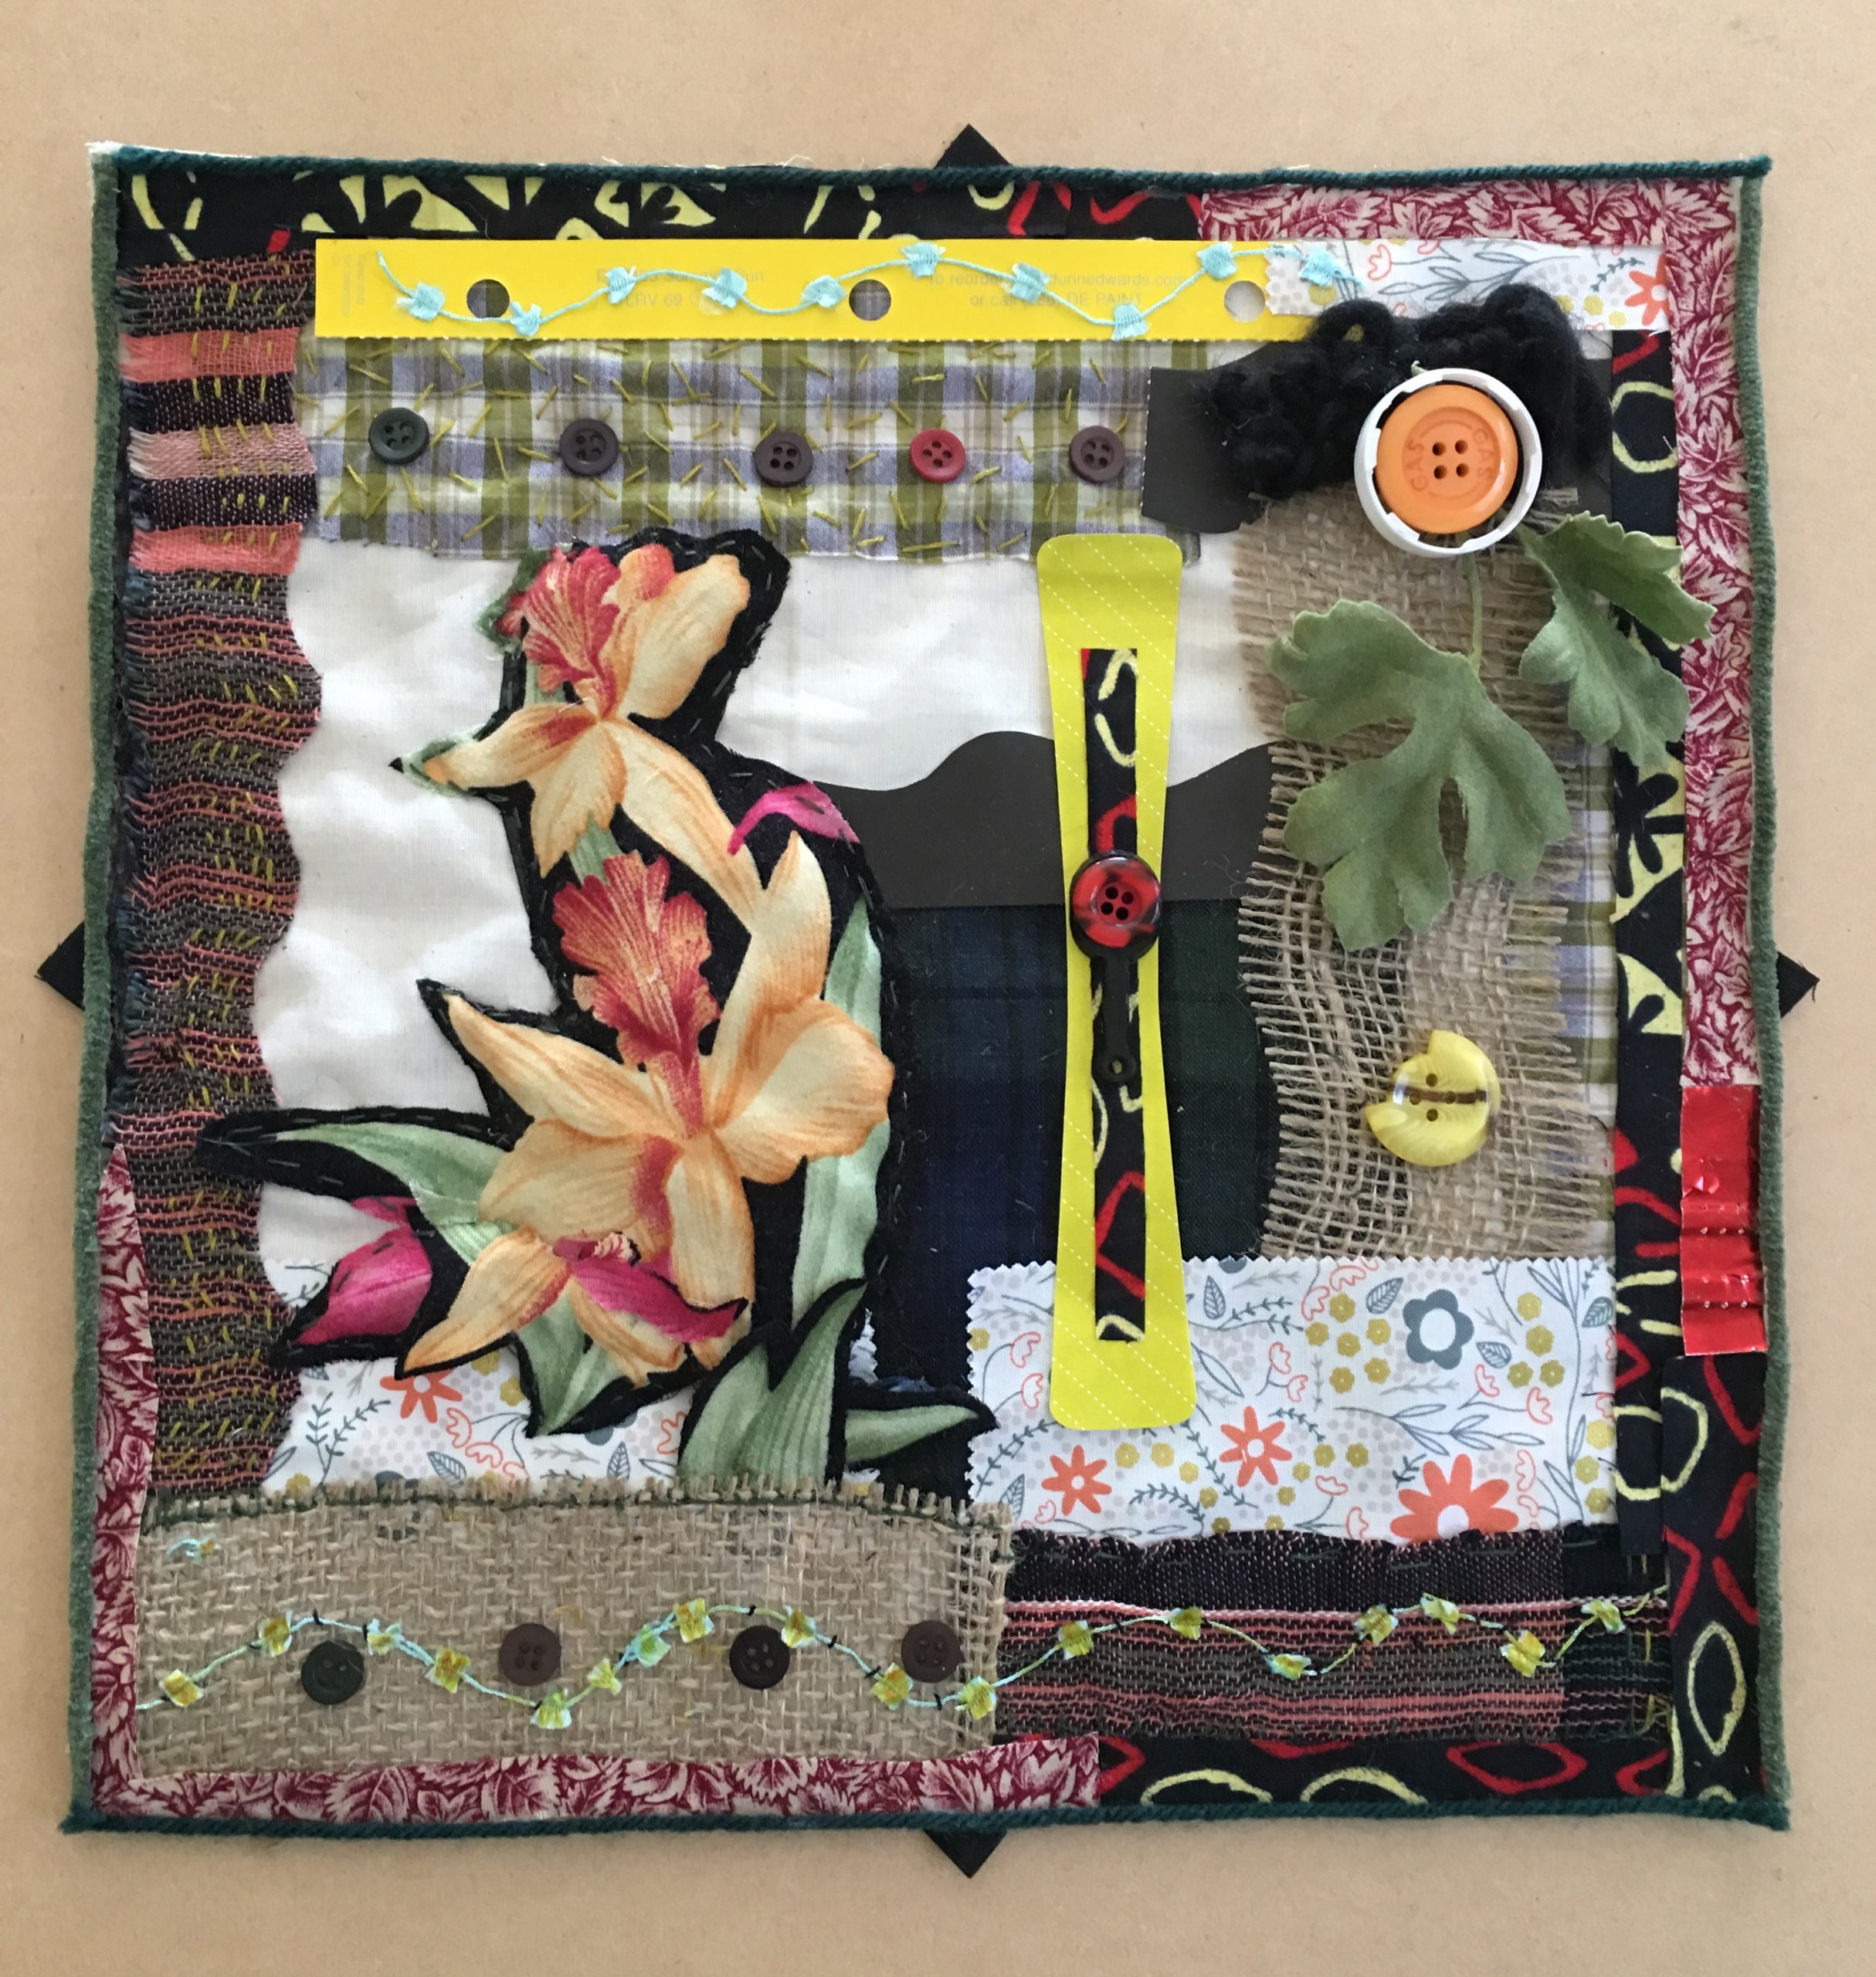 Orchid Fabric Collage, Fabric and items from workshop participants, Craft Contemporary